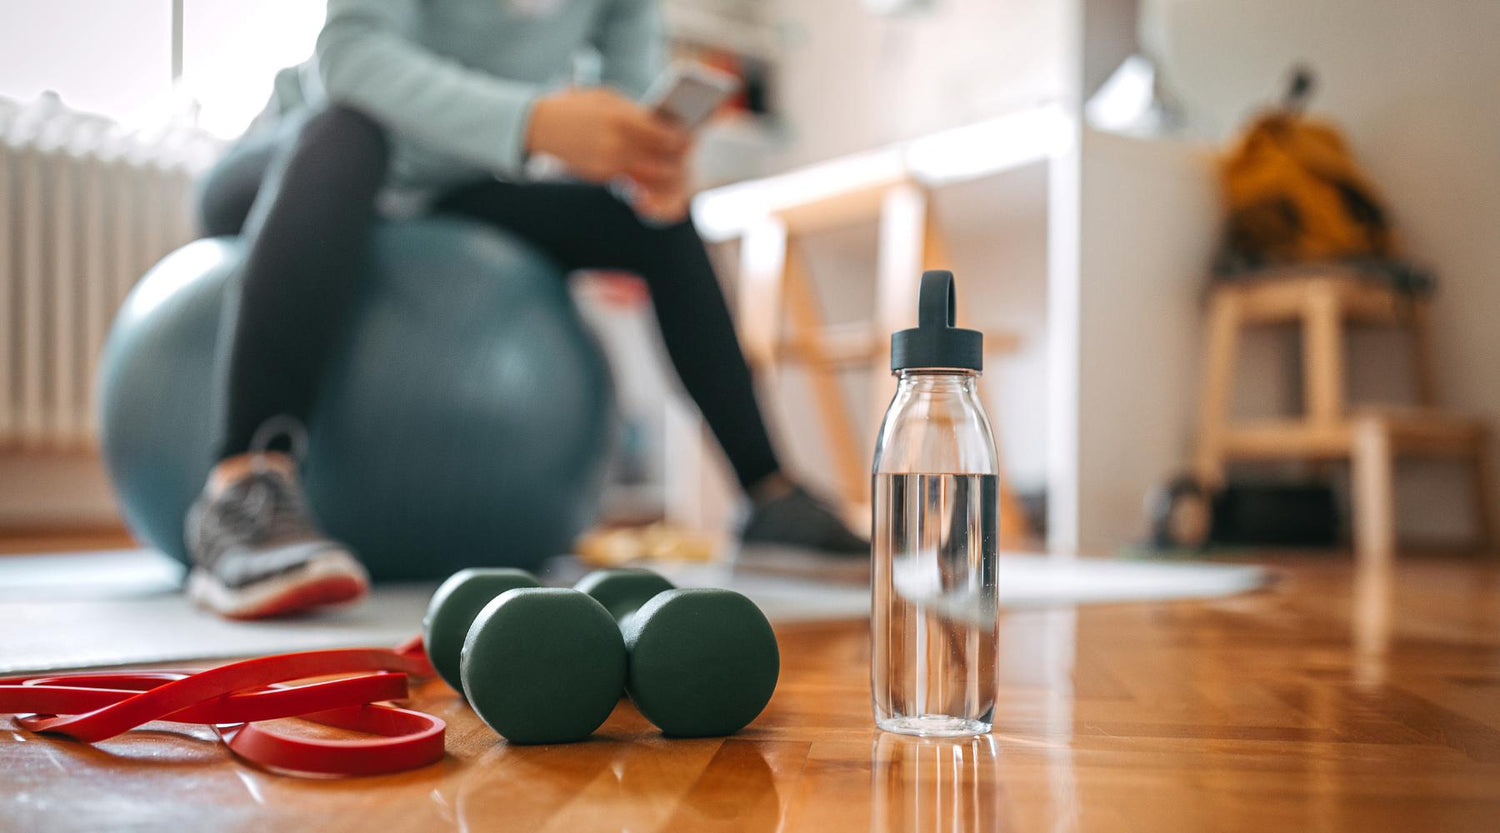 Woman browsing her phone while sitting on a yoga ball in her living room with a red resistance band and water bottle in the foreground